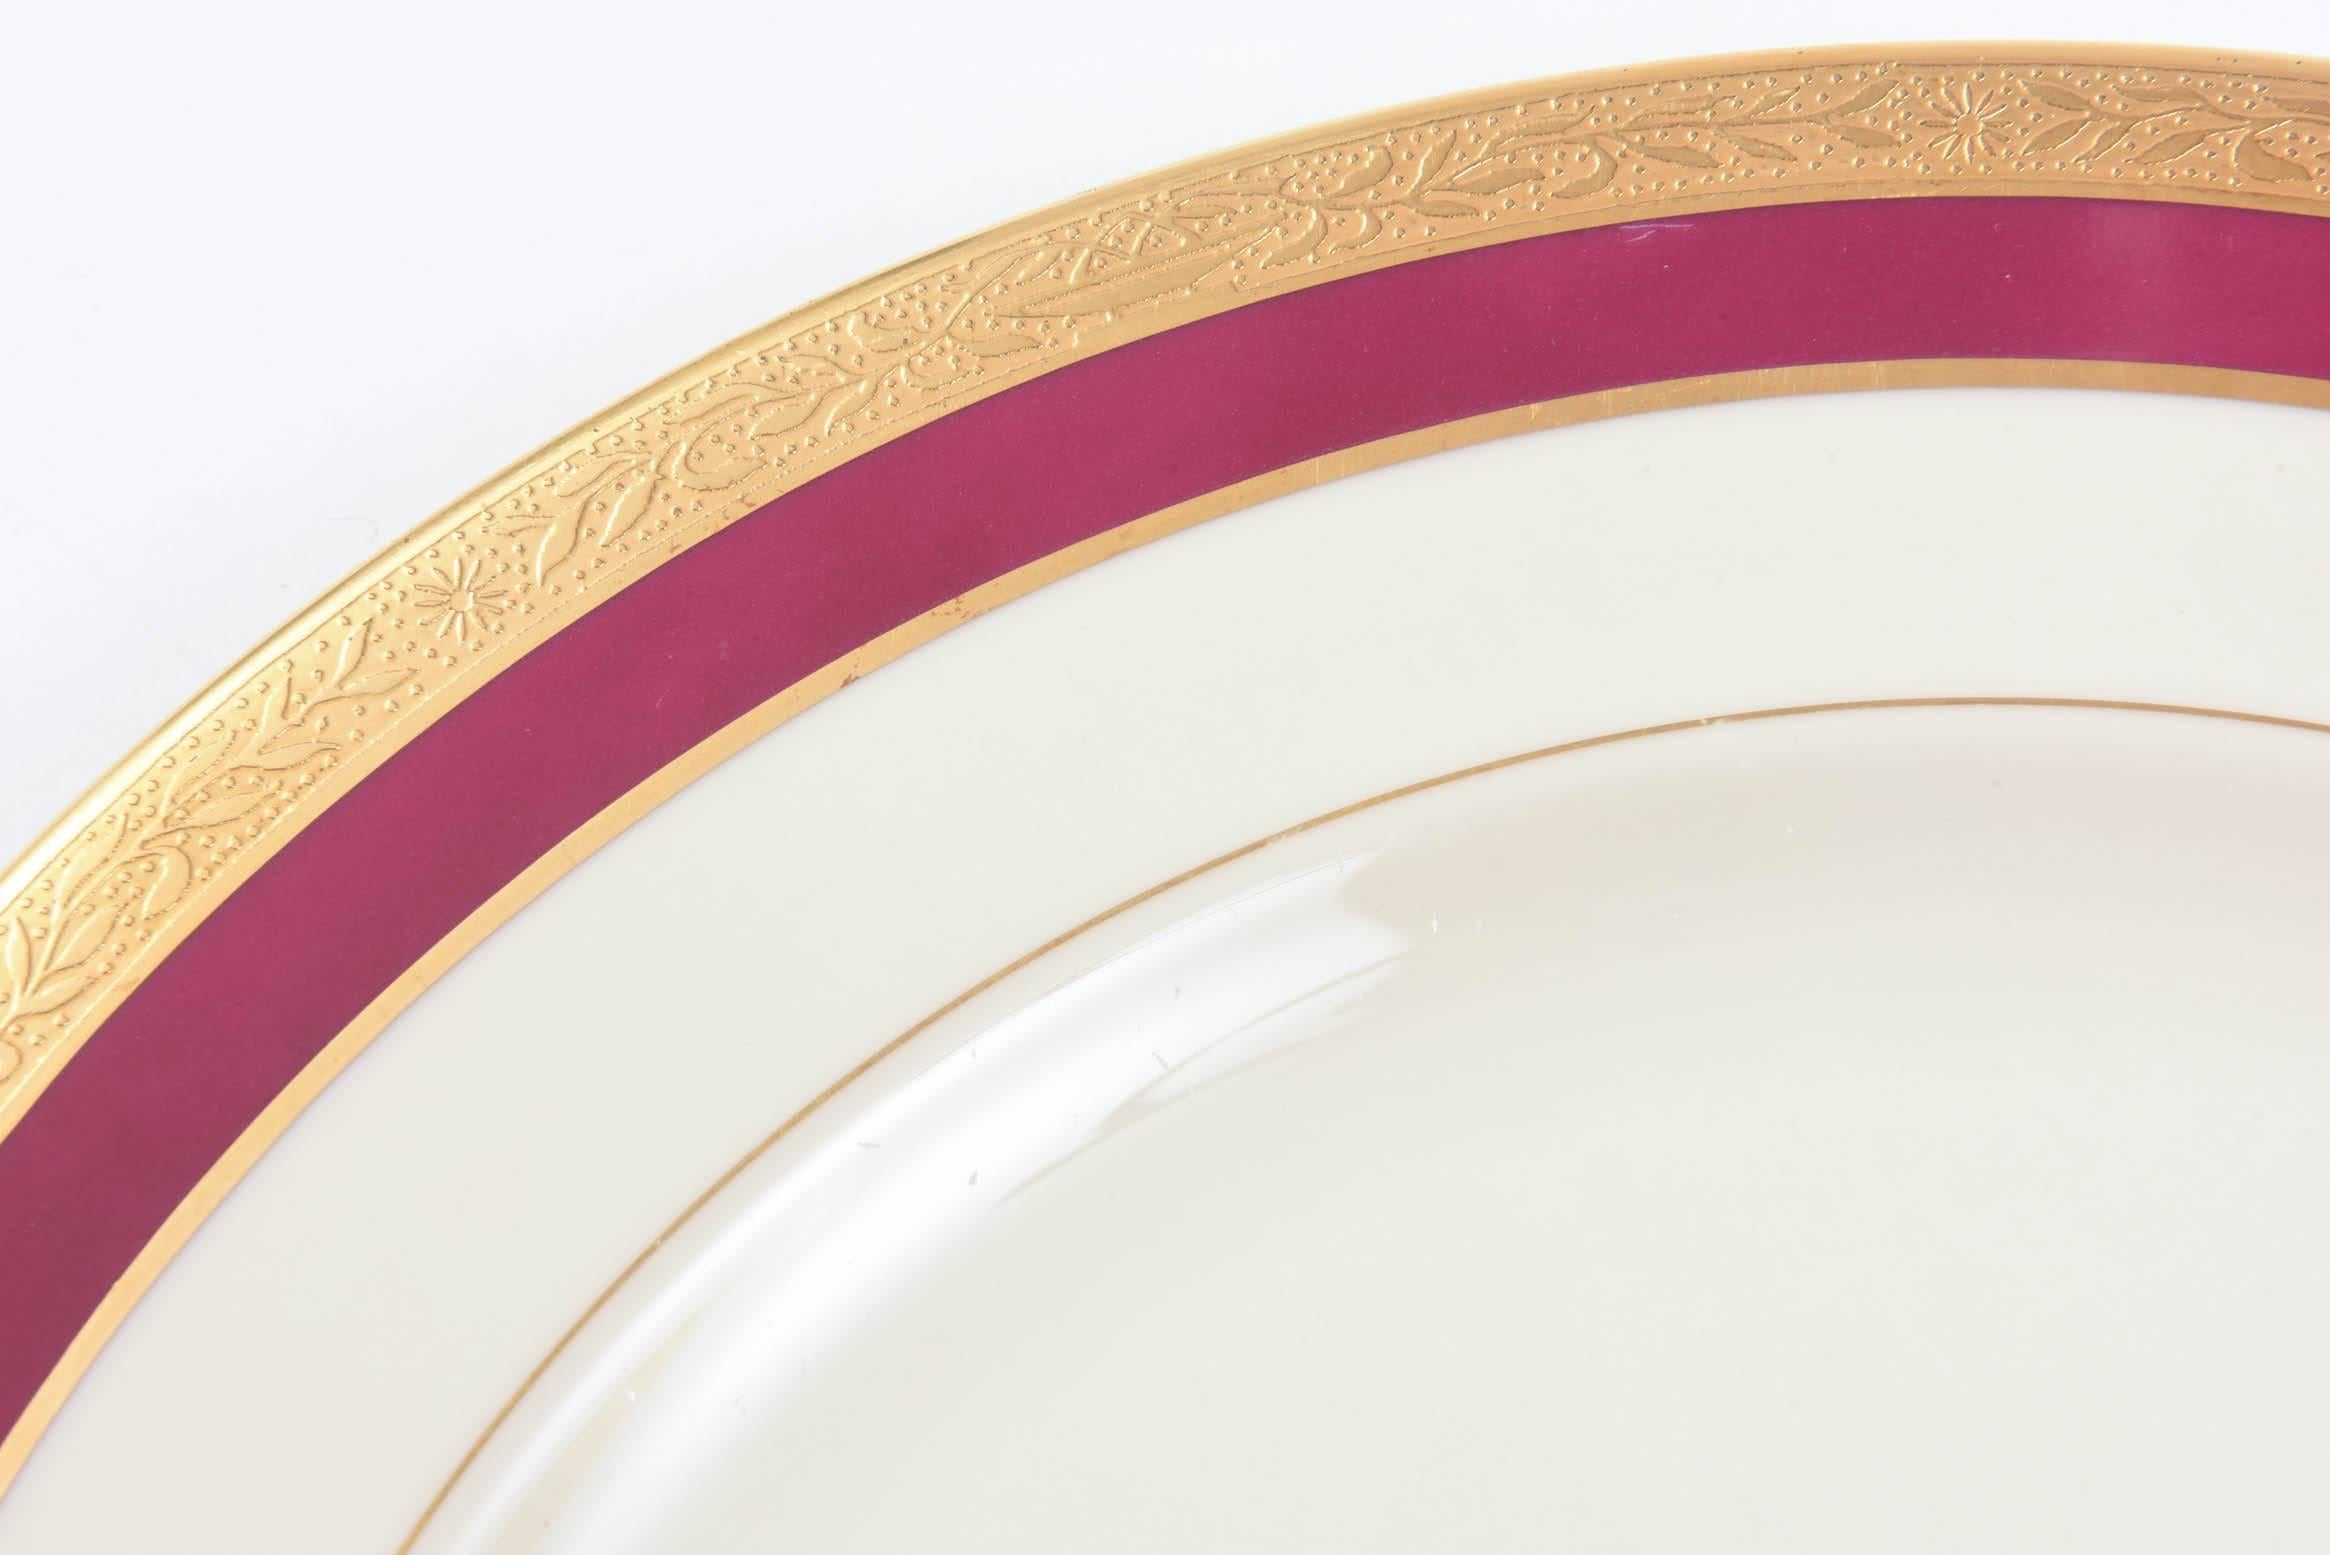 A nice sized plate elegantly decorated on the collar with a ruby band and featuring an acid etched 24-karat gold band. Perfect to mix and match in with all your fine tabletop.